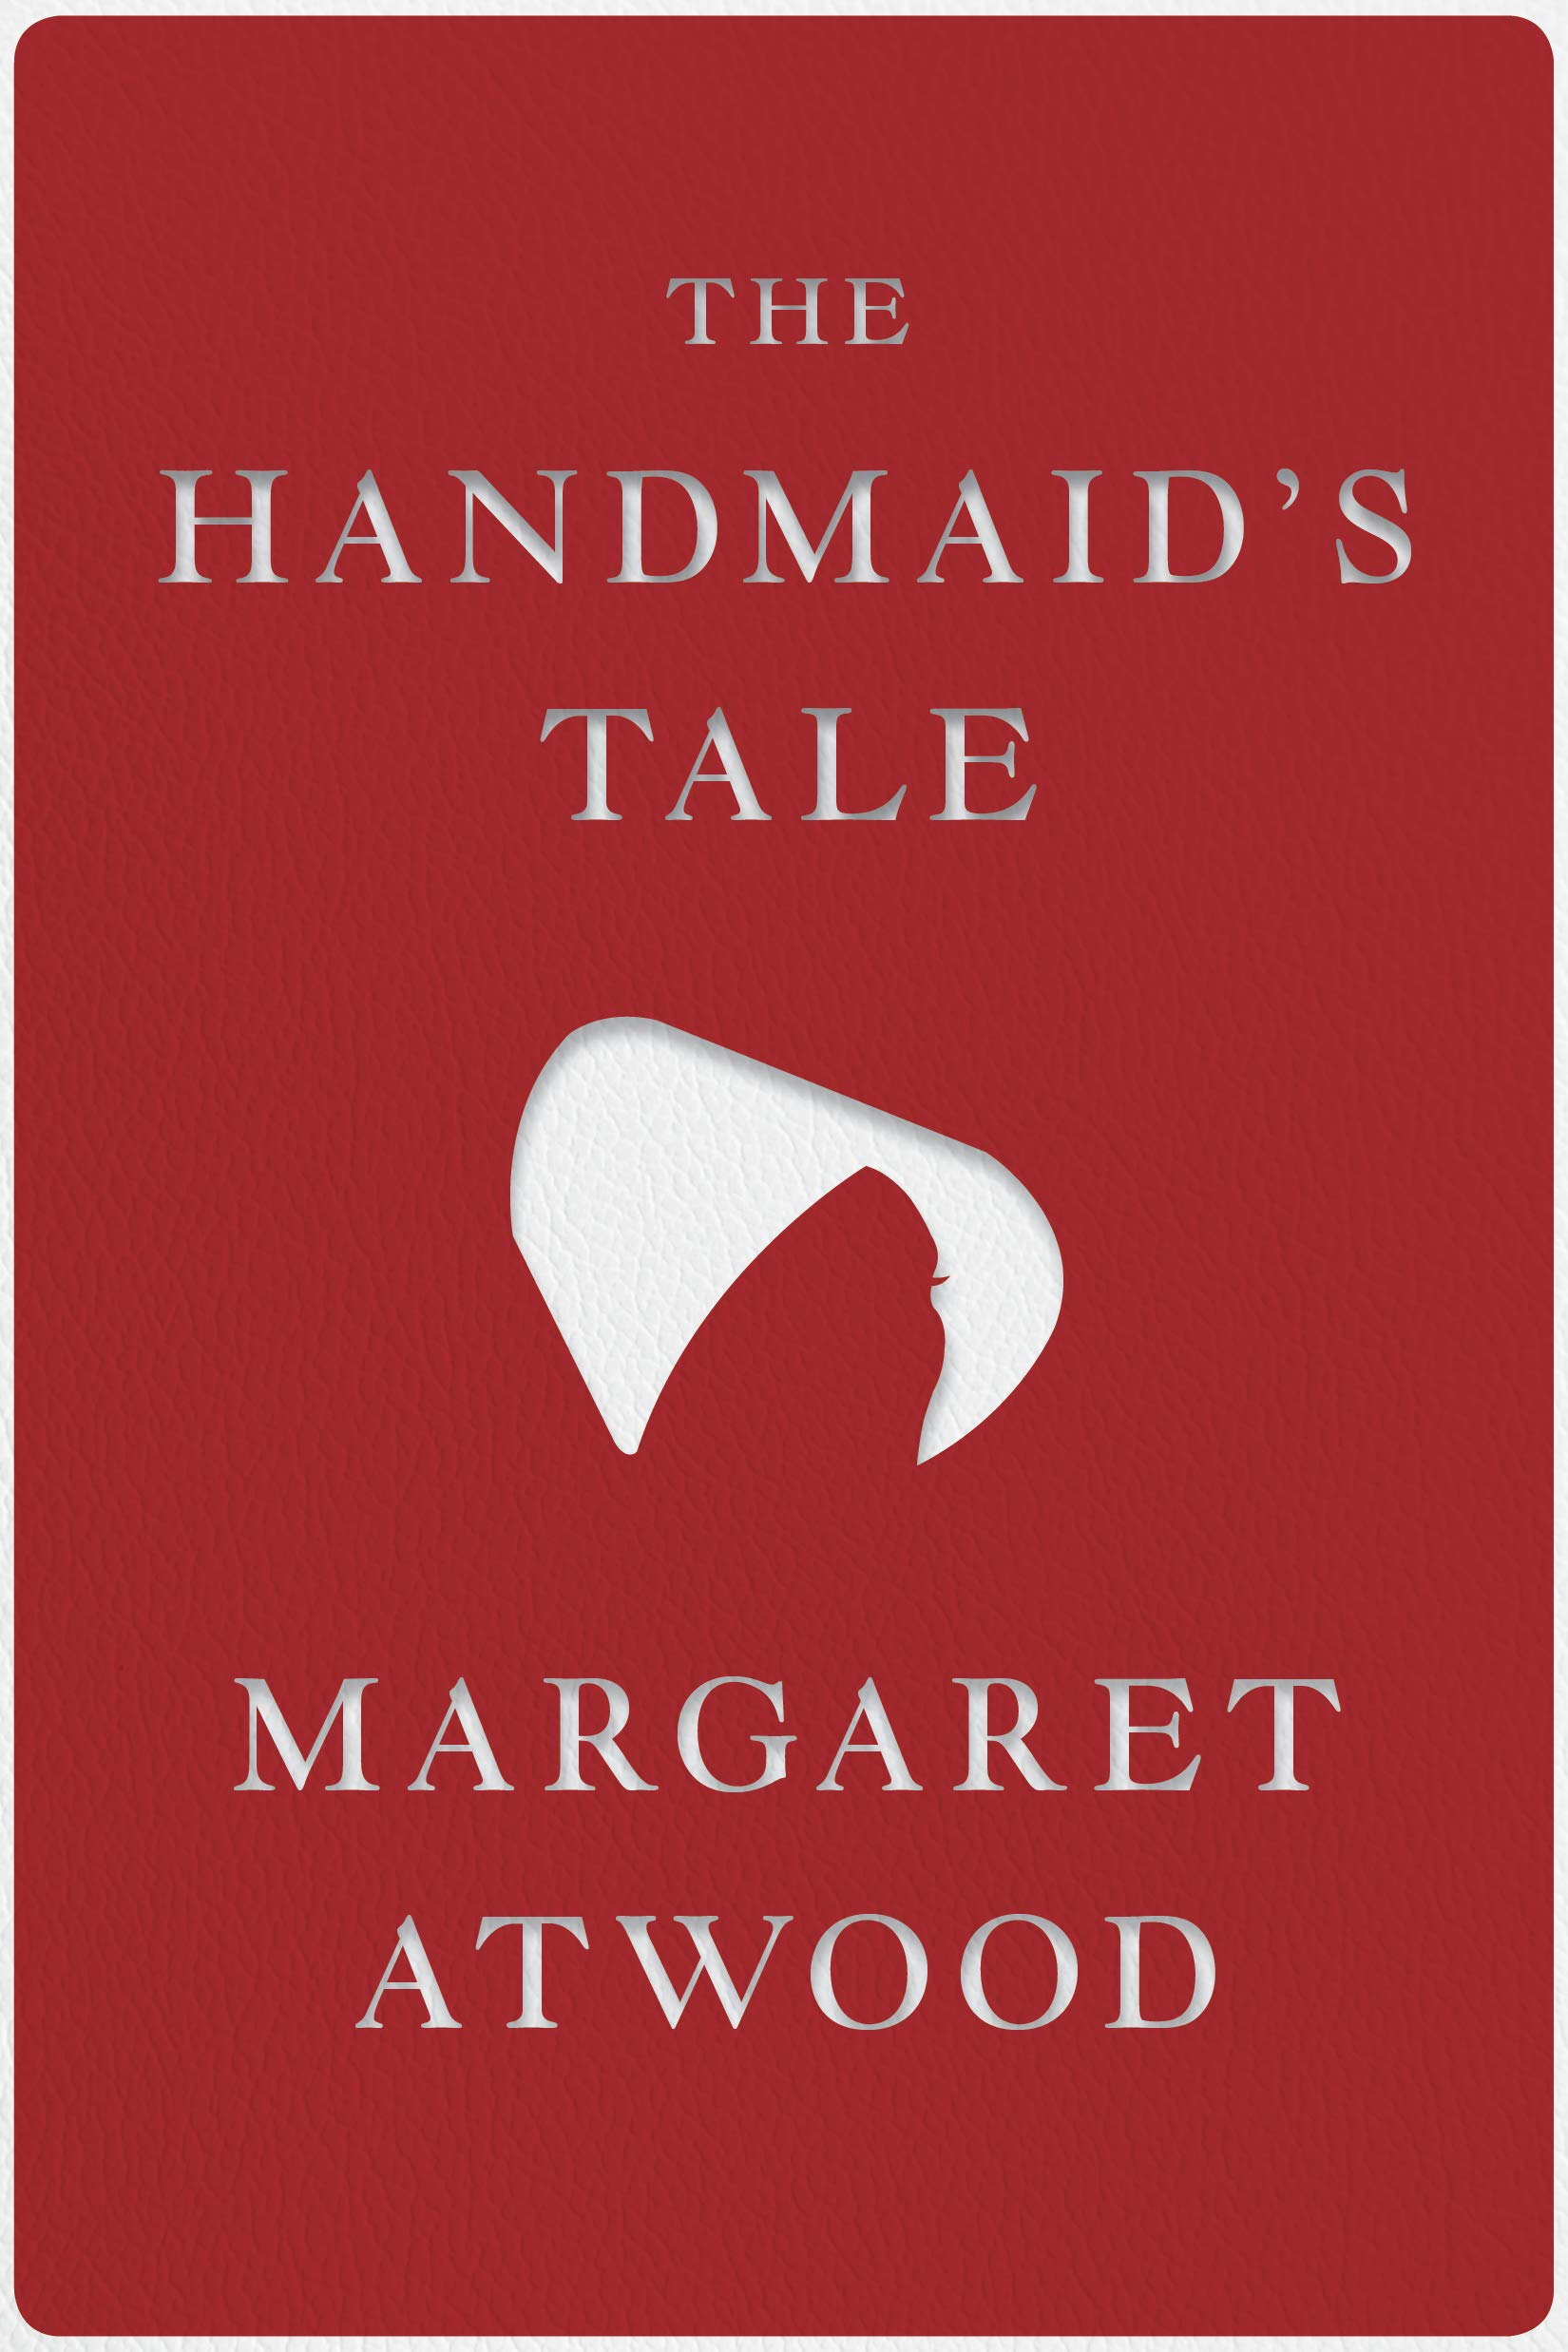 Image for "The Handmaid's Tale"